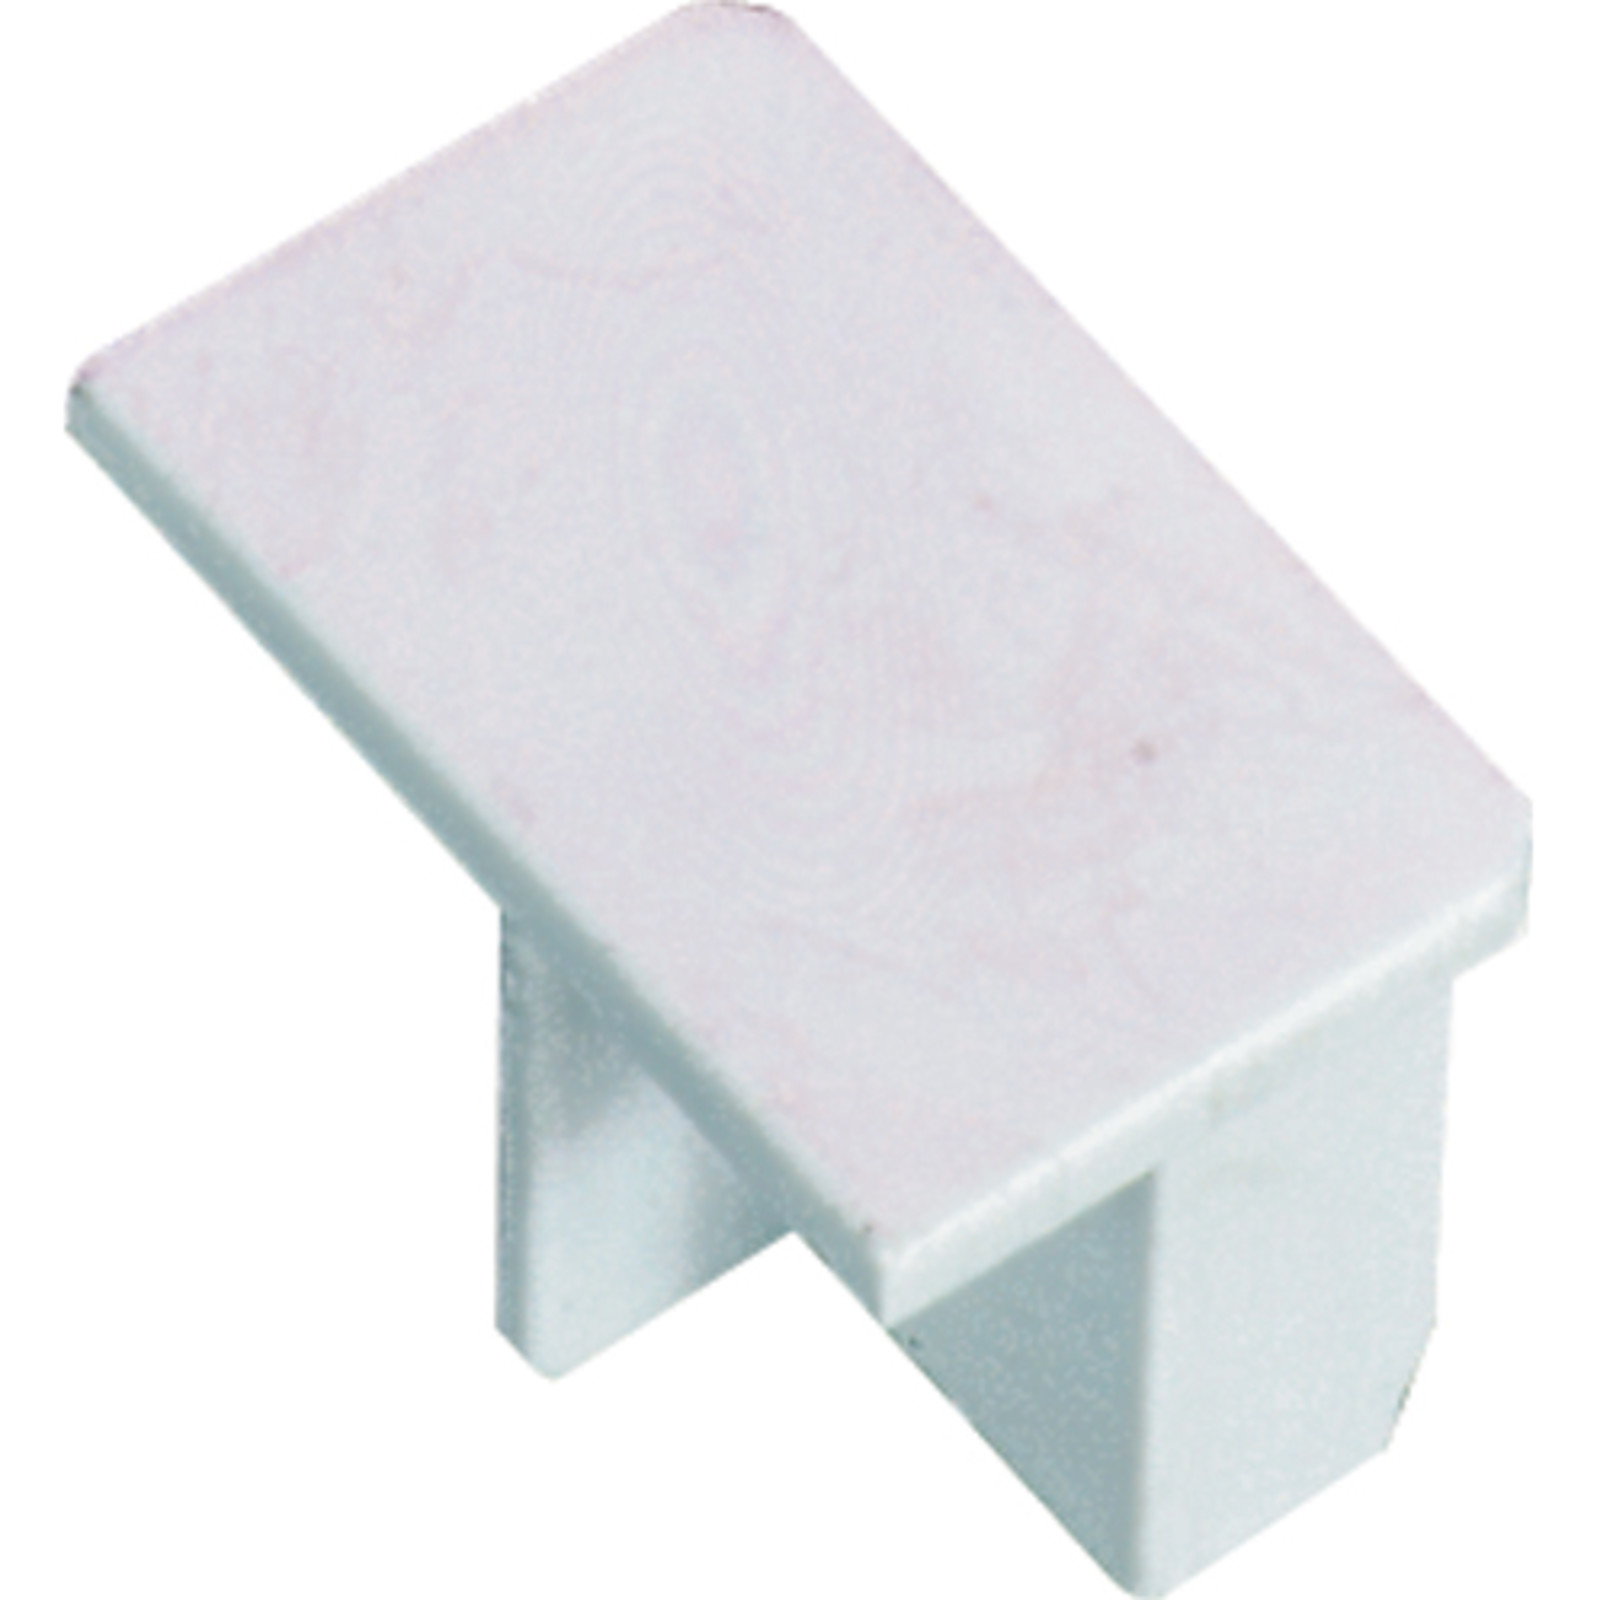 Maxi Trunking Fittings 75 x 50mm End Caps